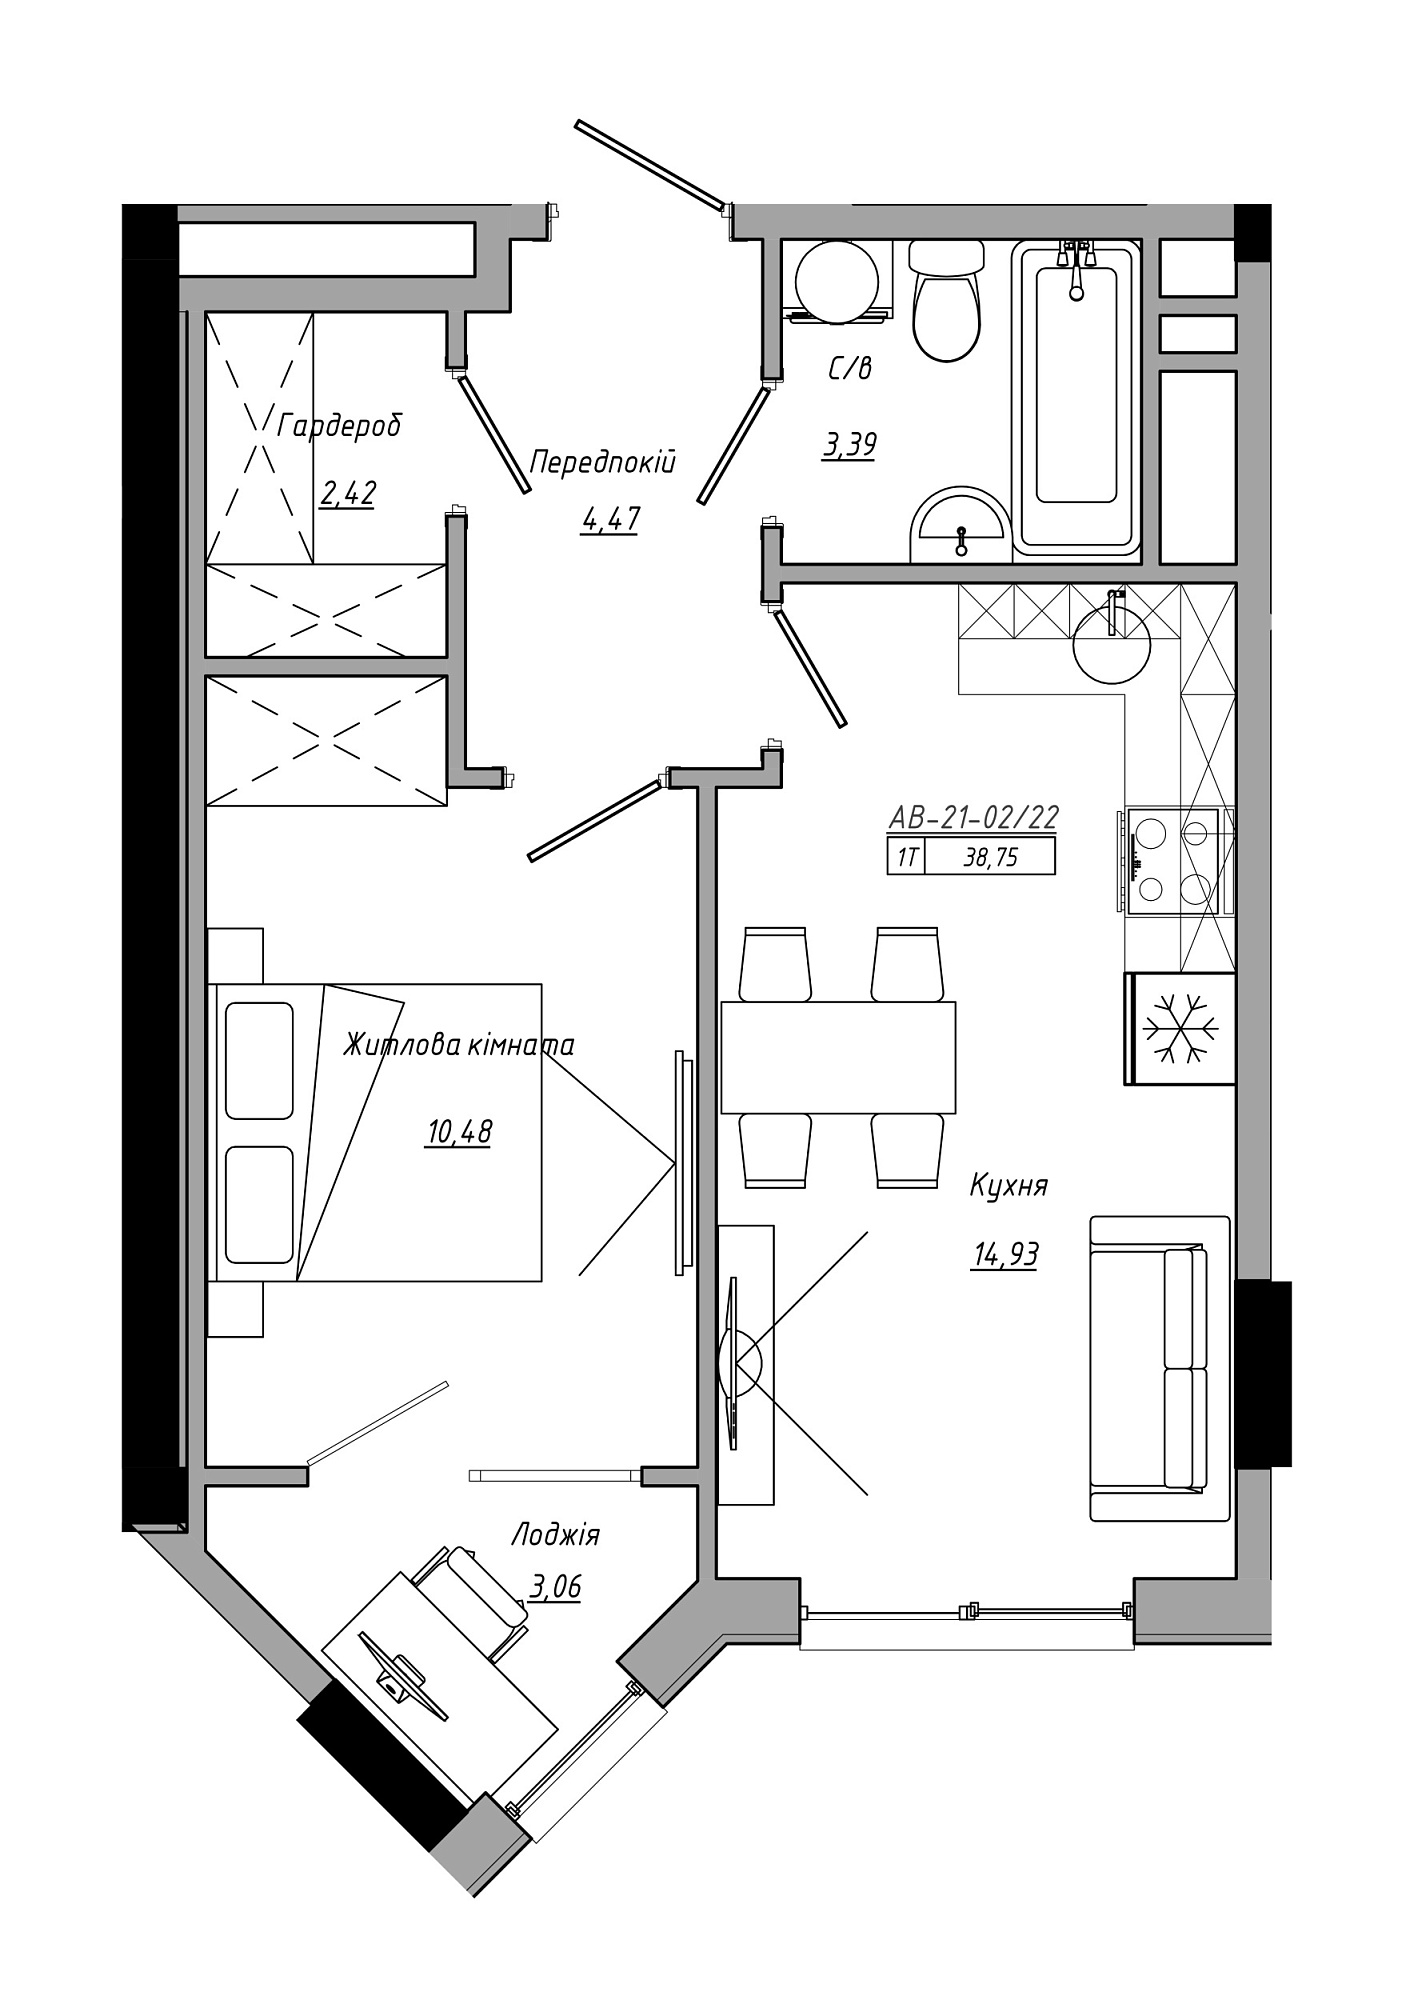 Planning 1-rm flats area 38.75m2, AB-21-02/00022.